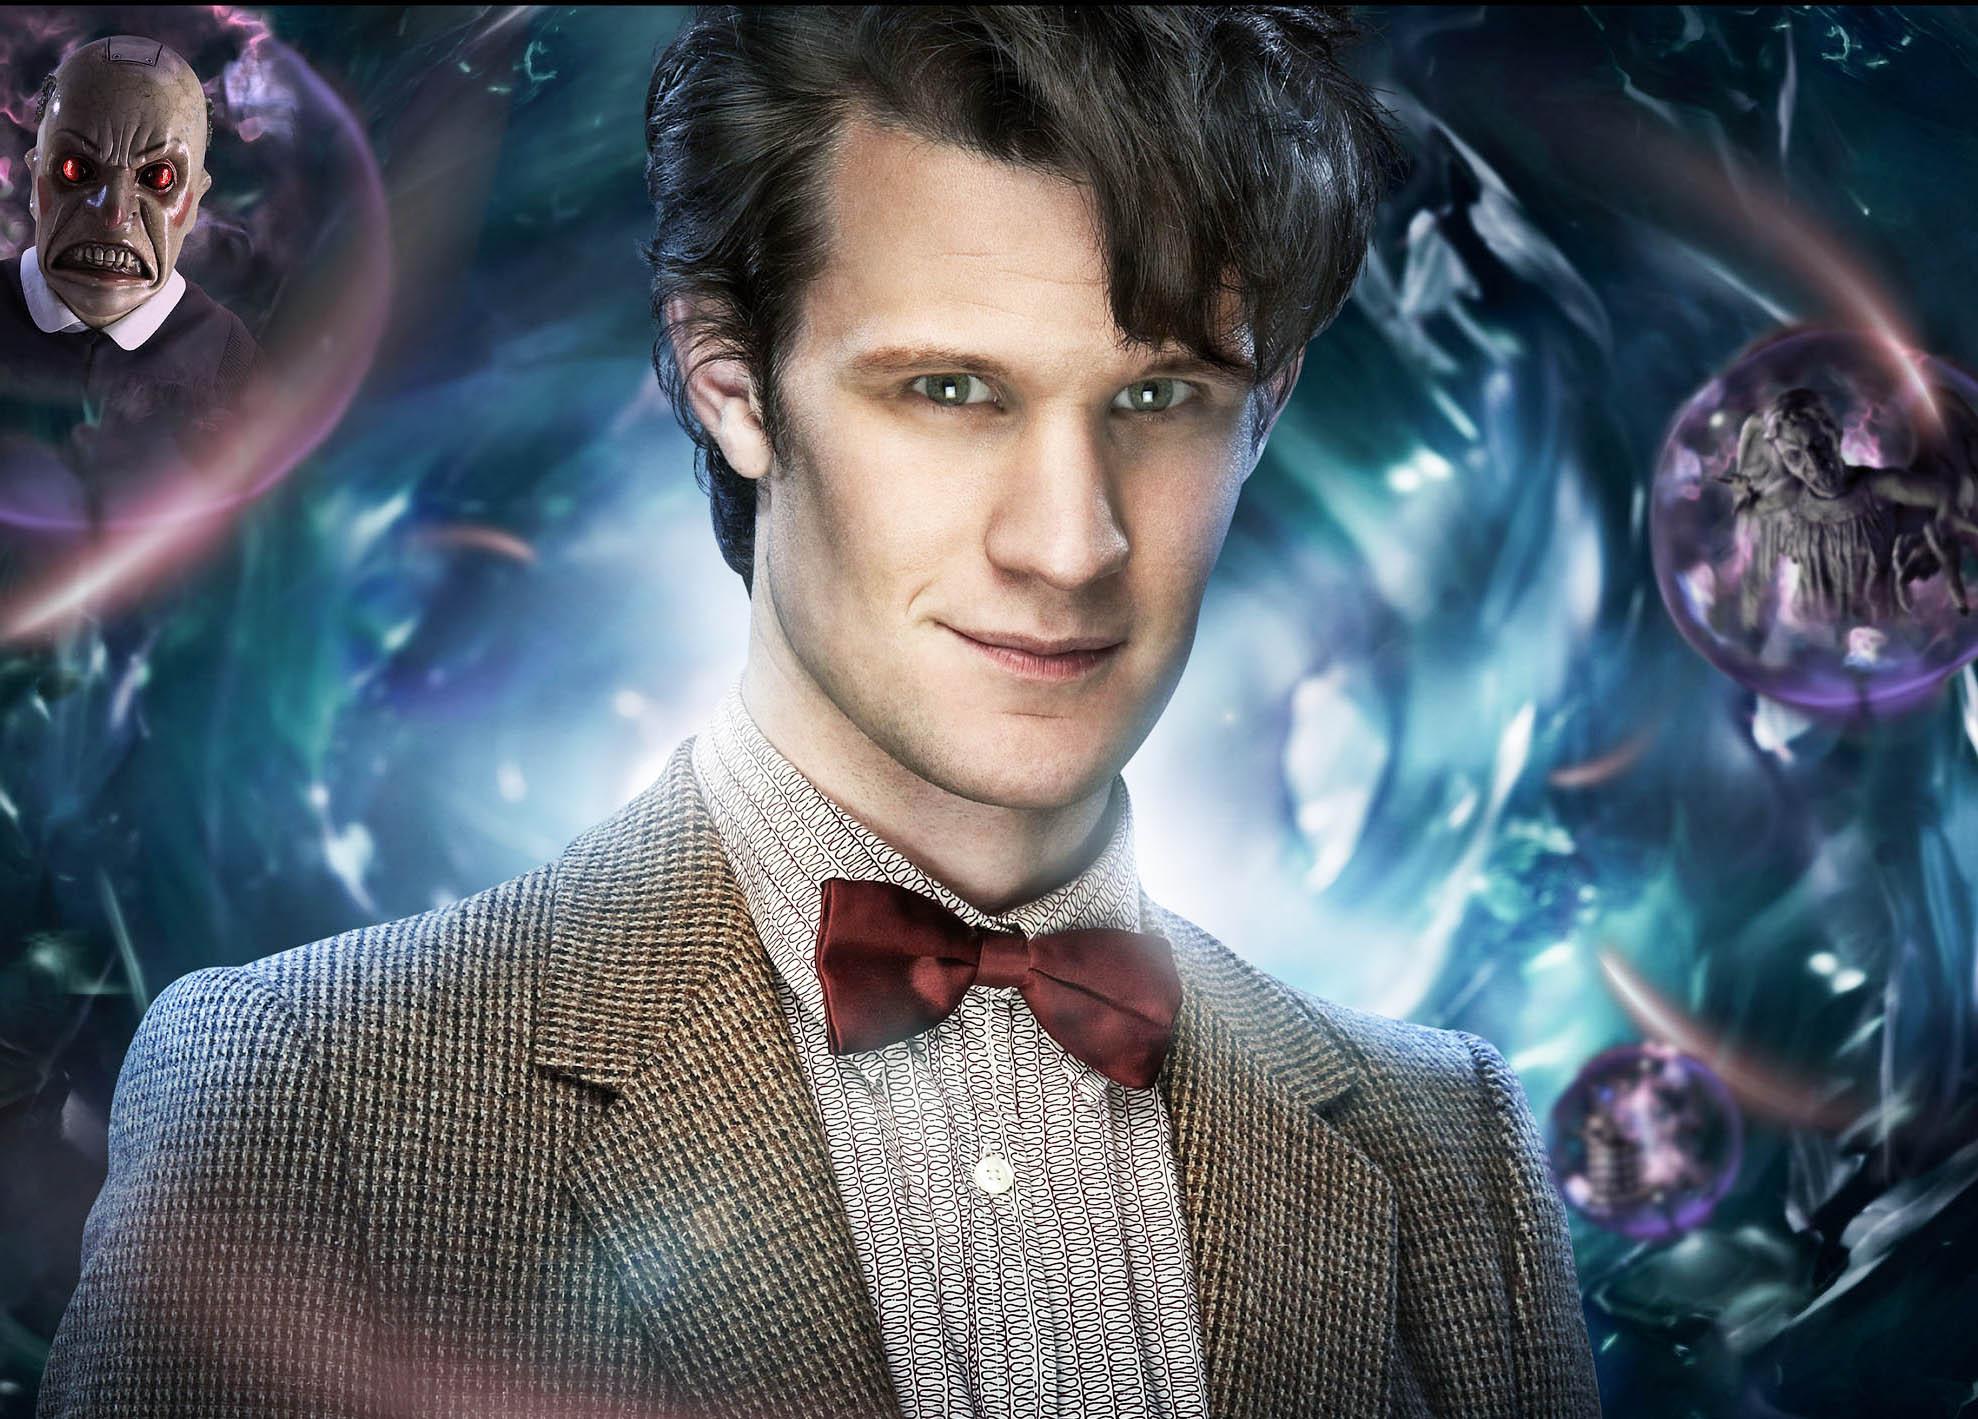 1978 x 1419 · jpeg - Doctor Who TV Show New High Resolution Wallpapers - All HD Wallpapers